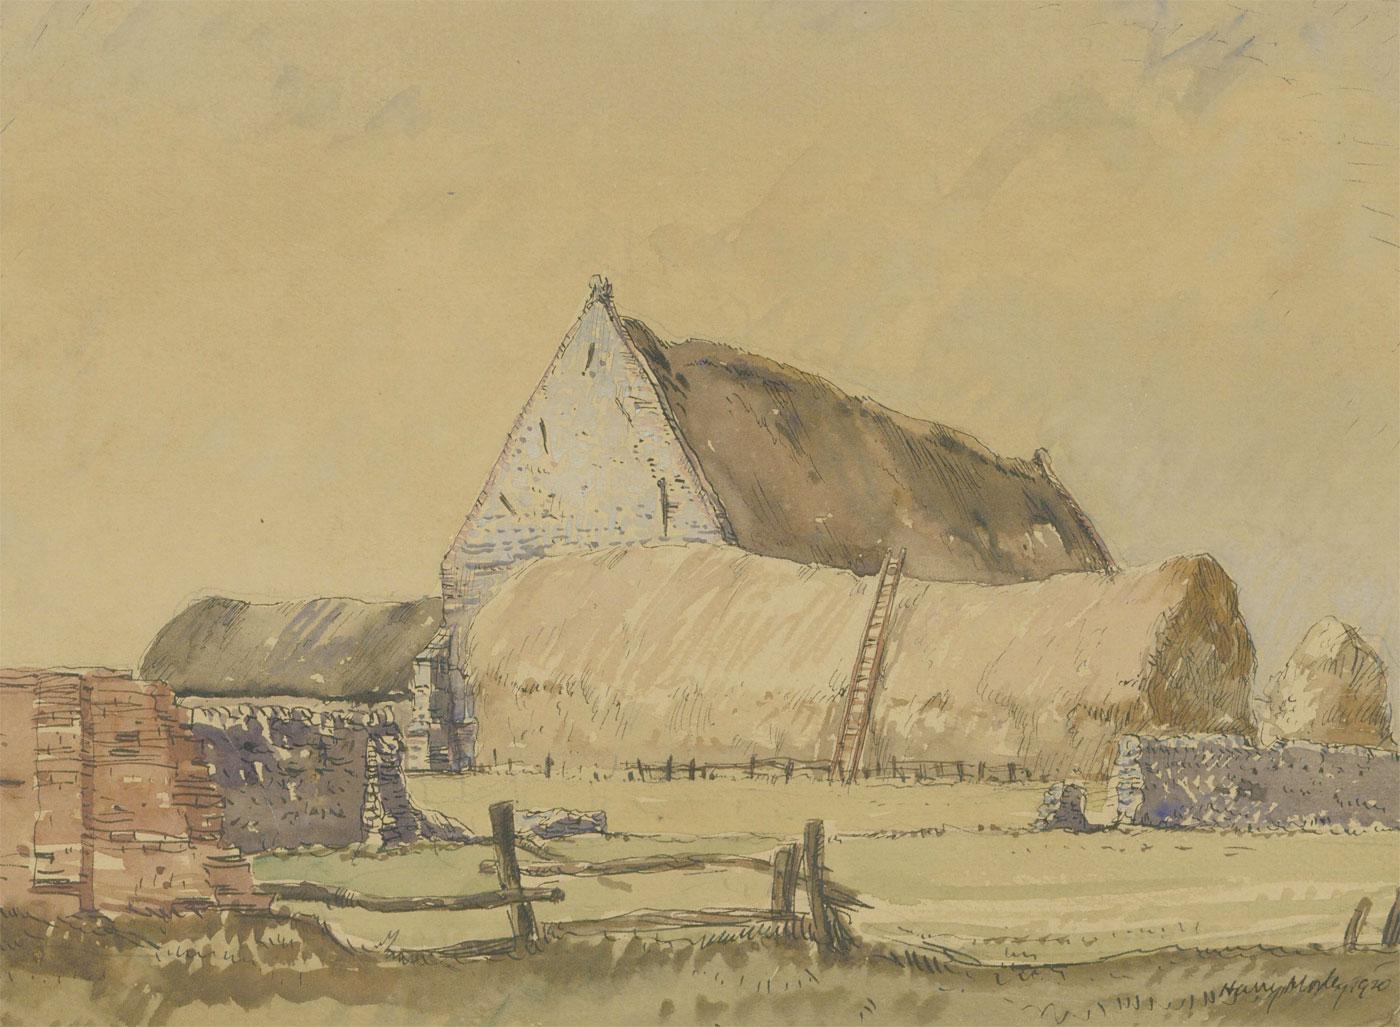 A wonderful watercolour study by the British artist Harry Morley RWS (1881-1943). Known for his watercolour studies of street scenes and classical tempura figurative paintings, this delicate portrayal of the Tithe Barn at Waxham perfectly captures